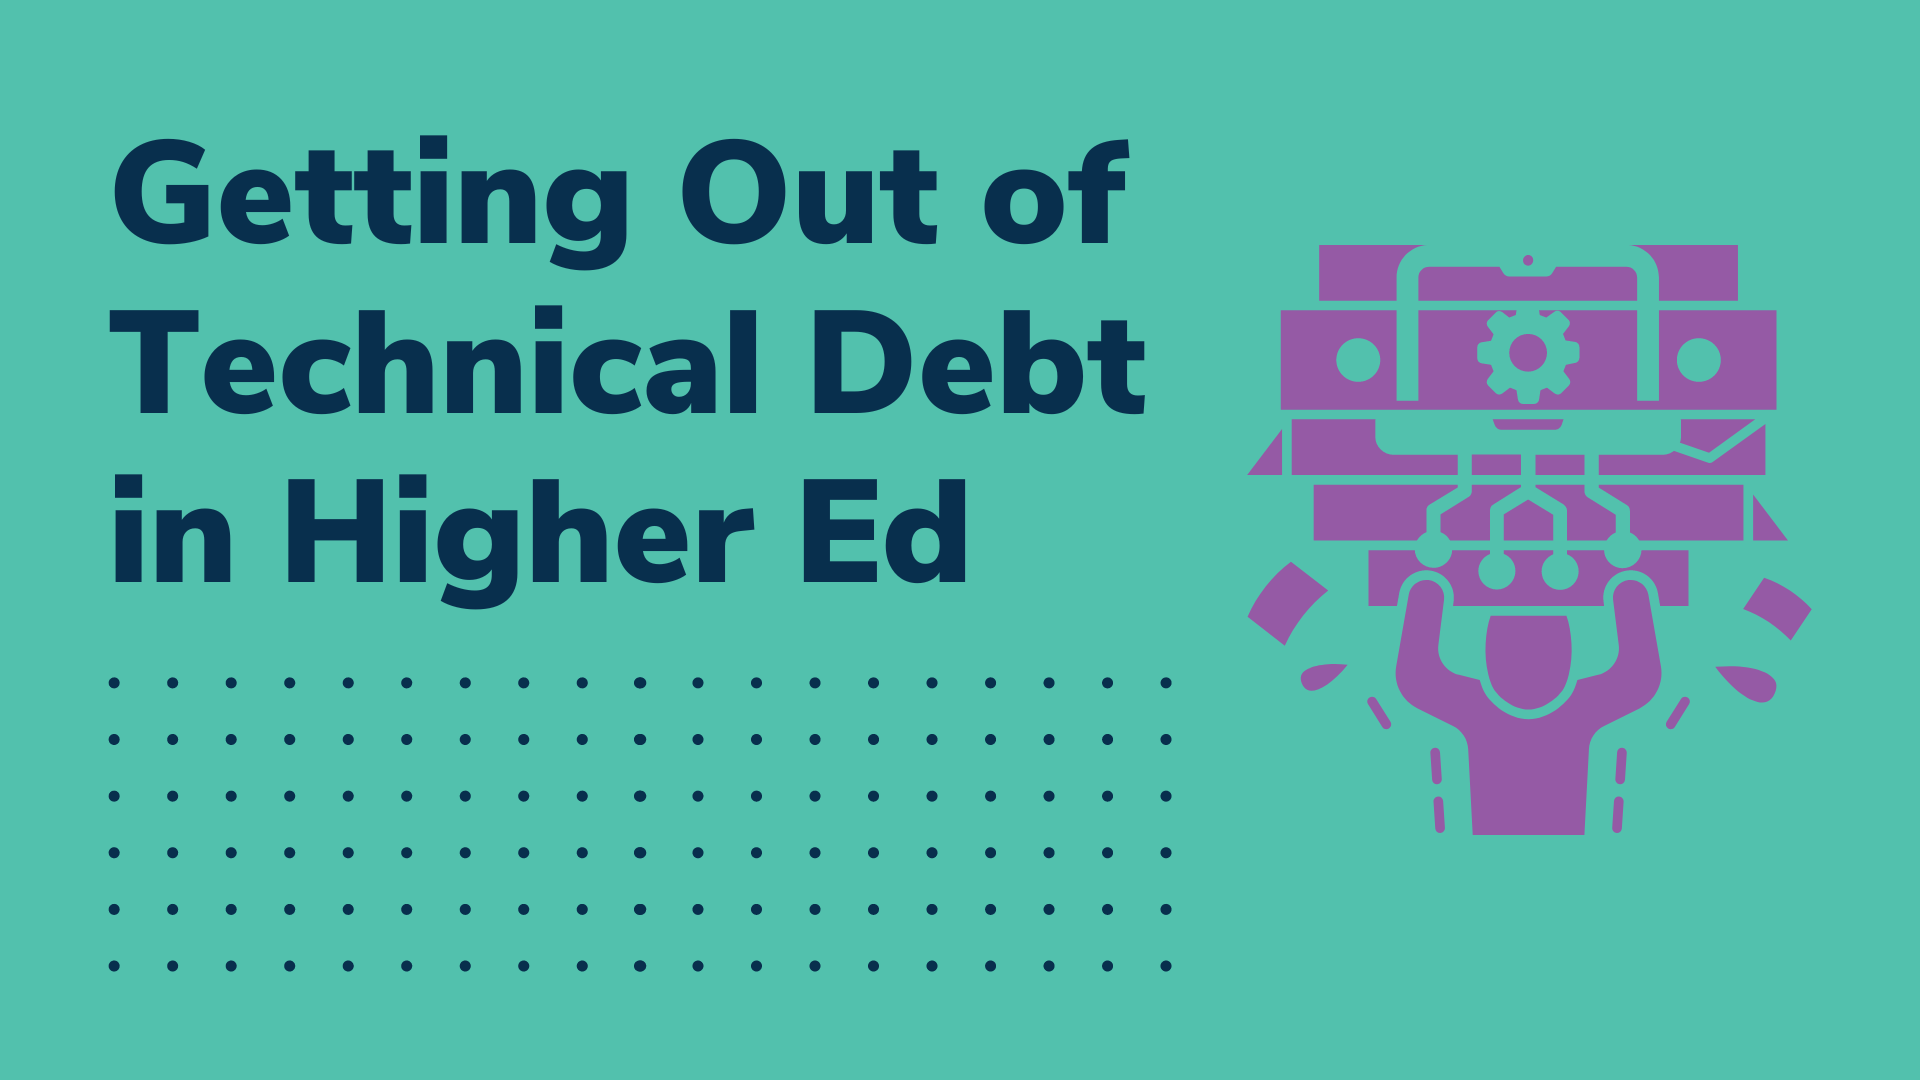 Read previous post: Getting Out of Technical Debt in Higher Education